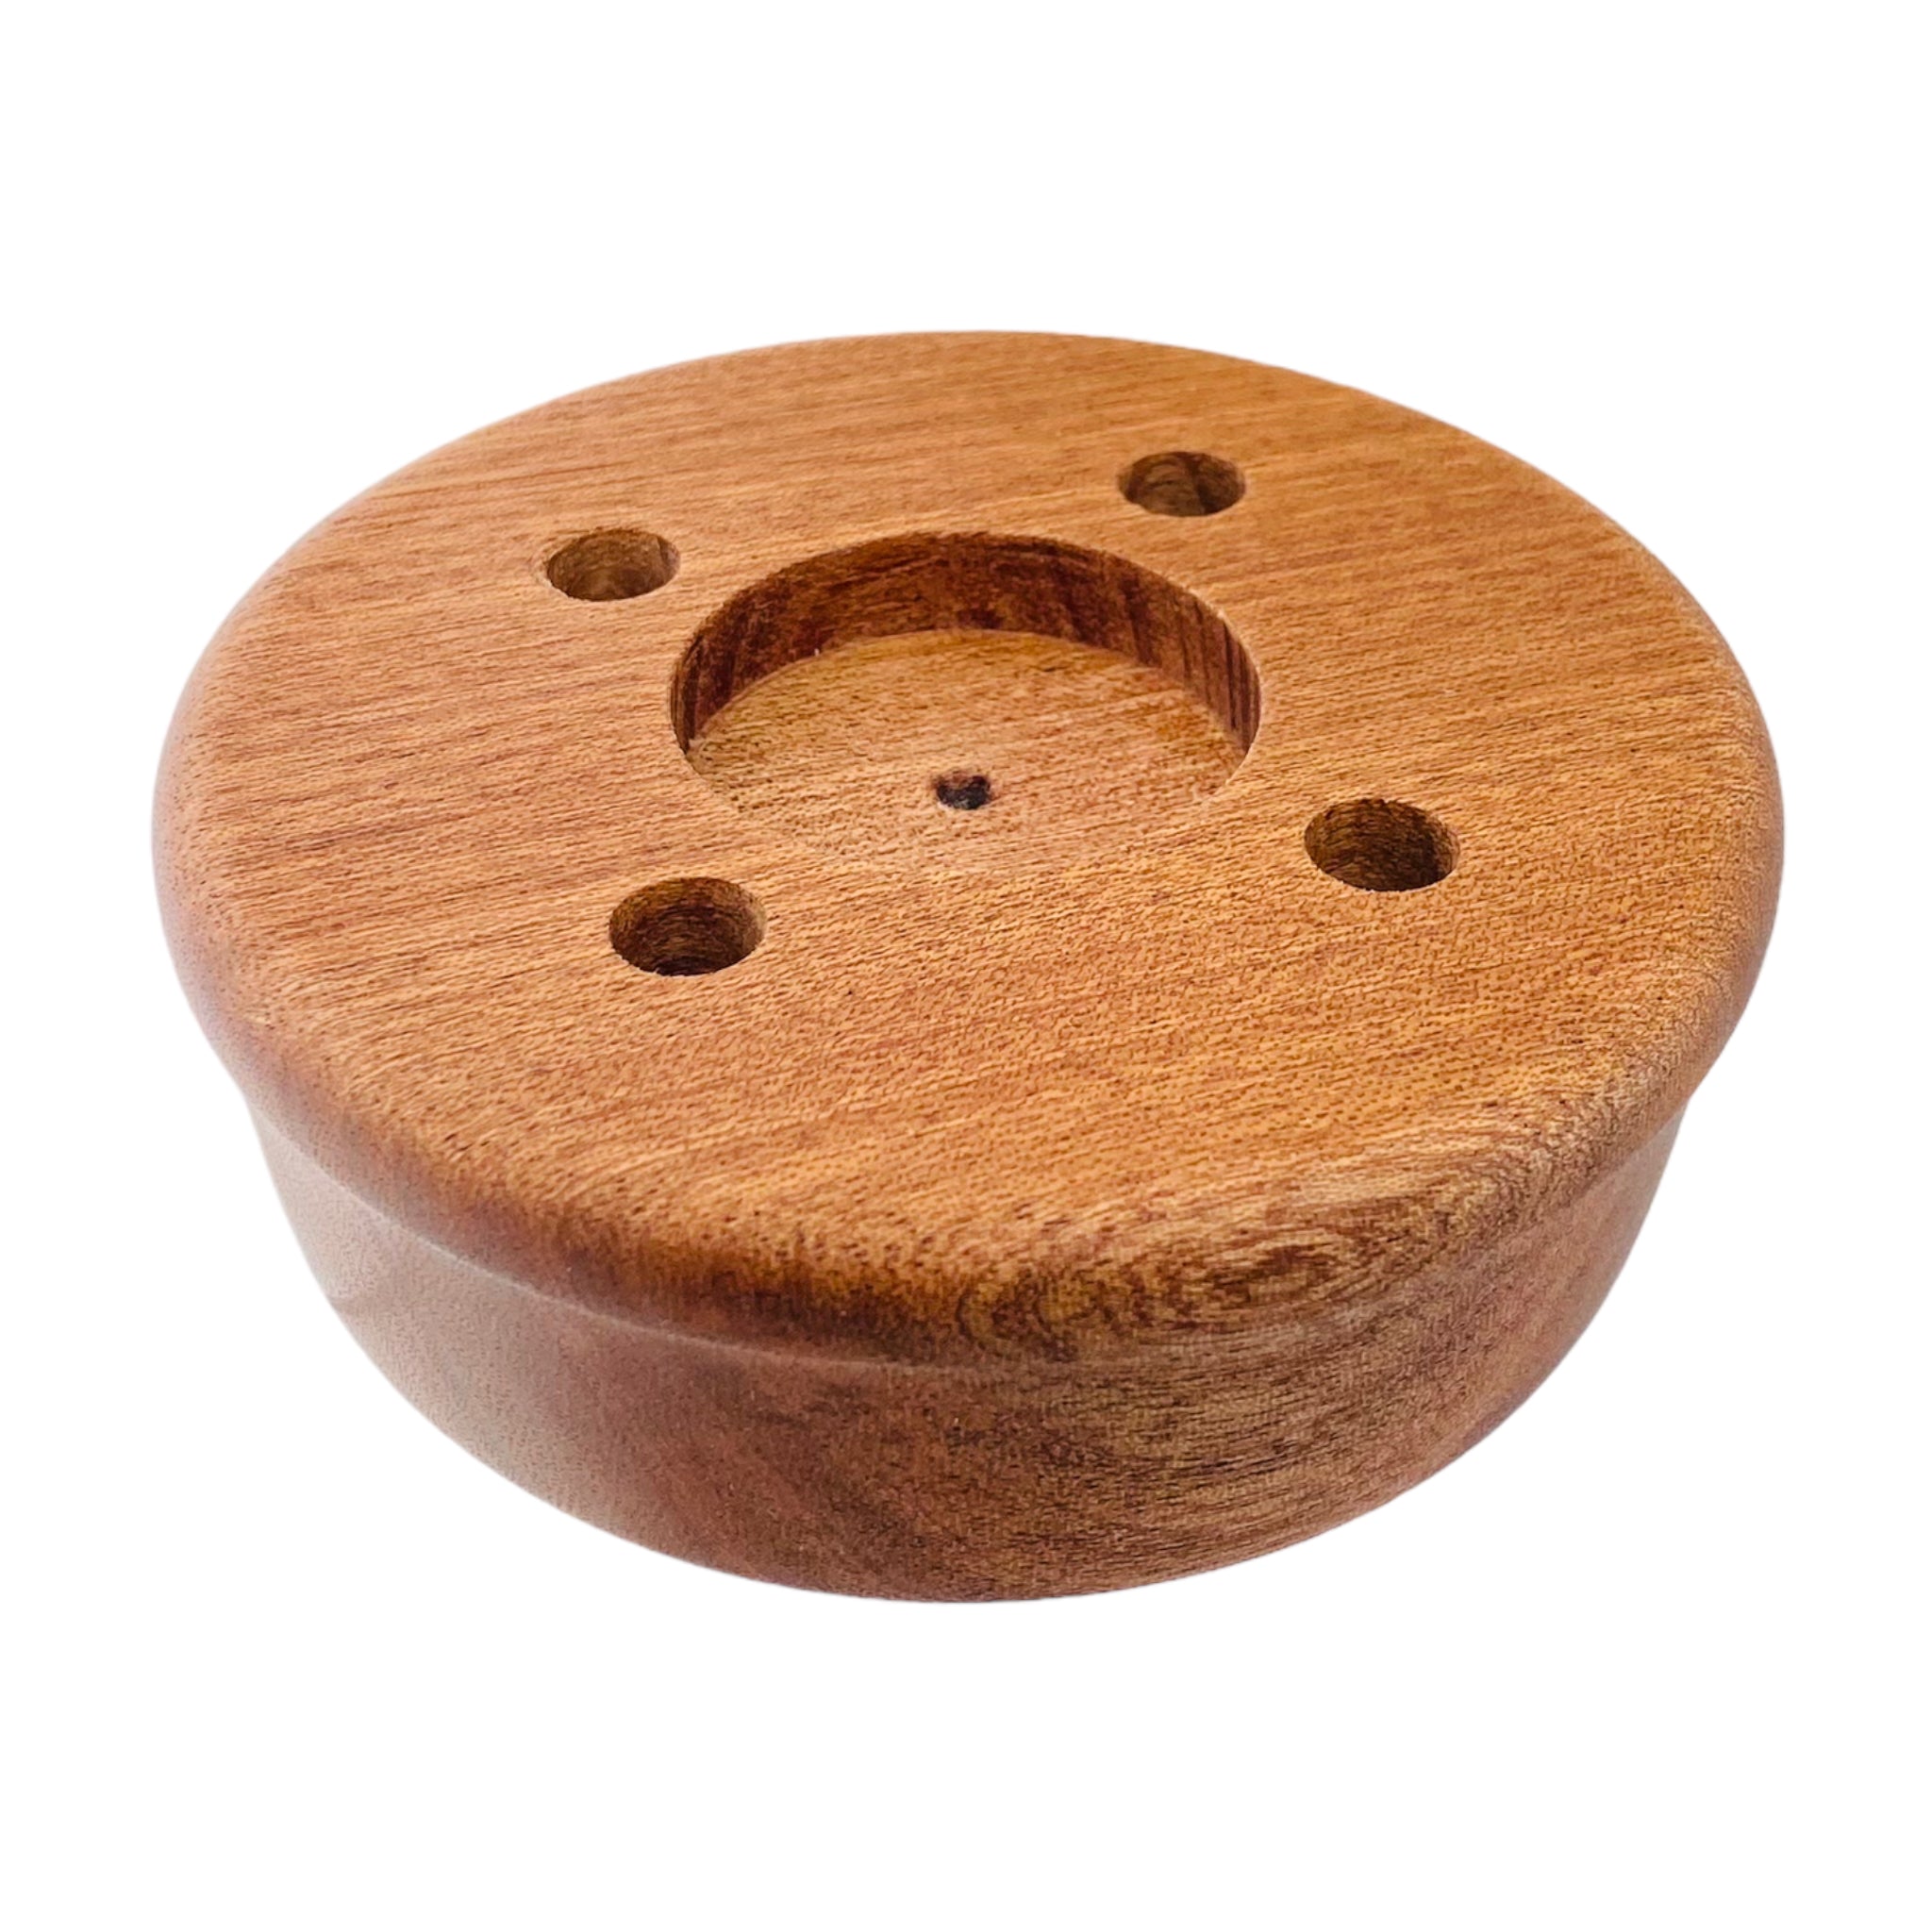 Round 4 Hole Wood Display Stand Holder For 10mm Bong Bowl Pieces Or Quartz Bangers - Mahogany Planter